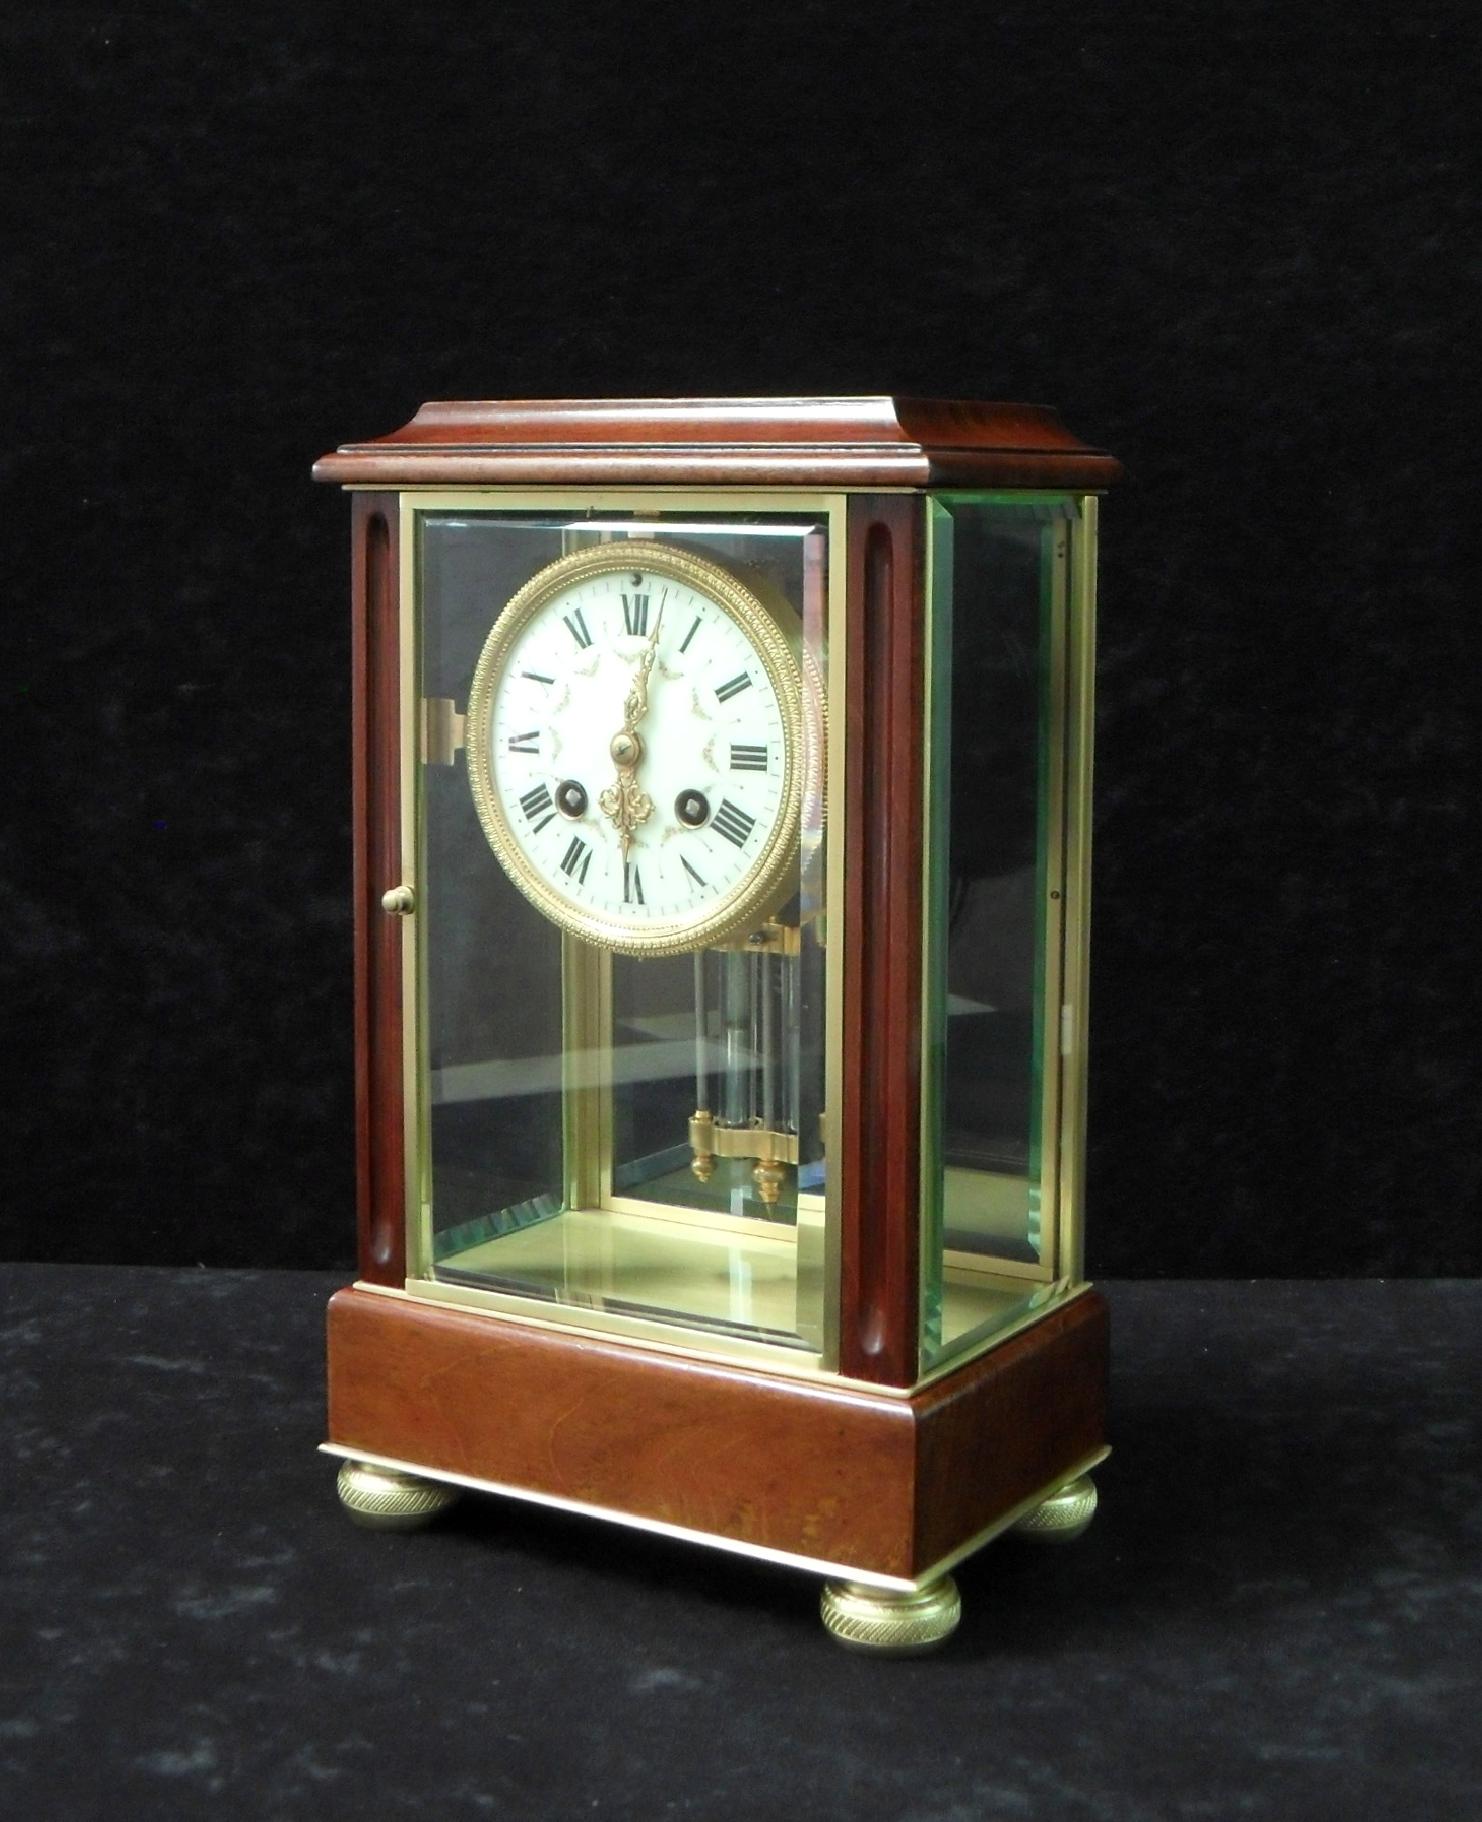 A good quality French mahogany four glass mantel clock with fluted front columns. The clock has a white enamel dial with painted detail and a French eight day movement which strikes the hours and half hours on a gong with compensating